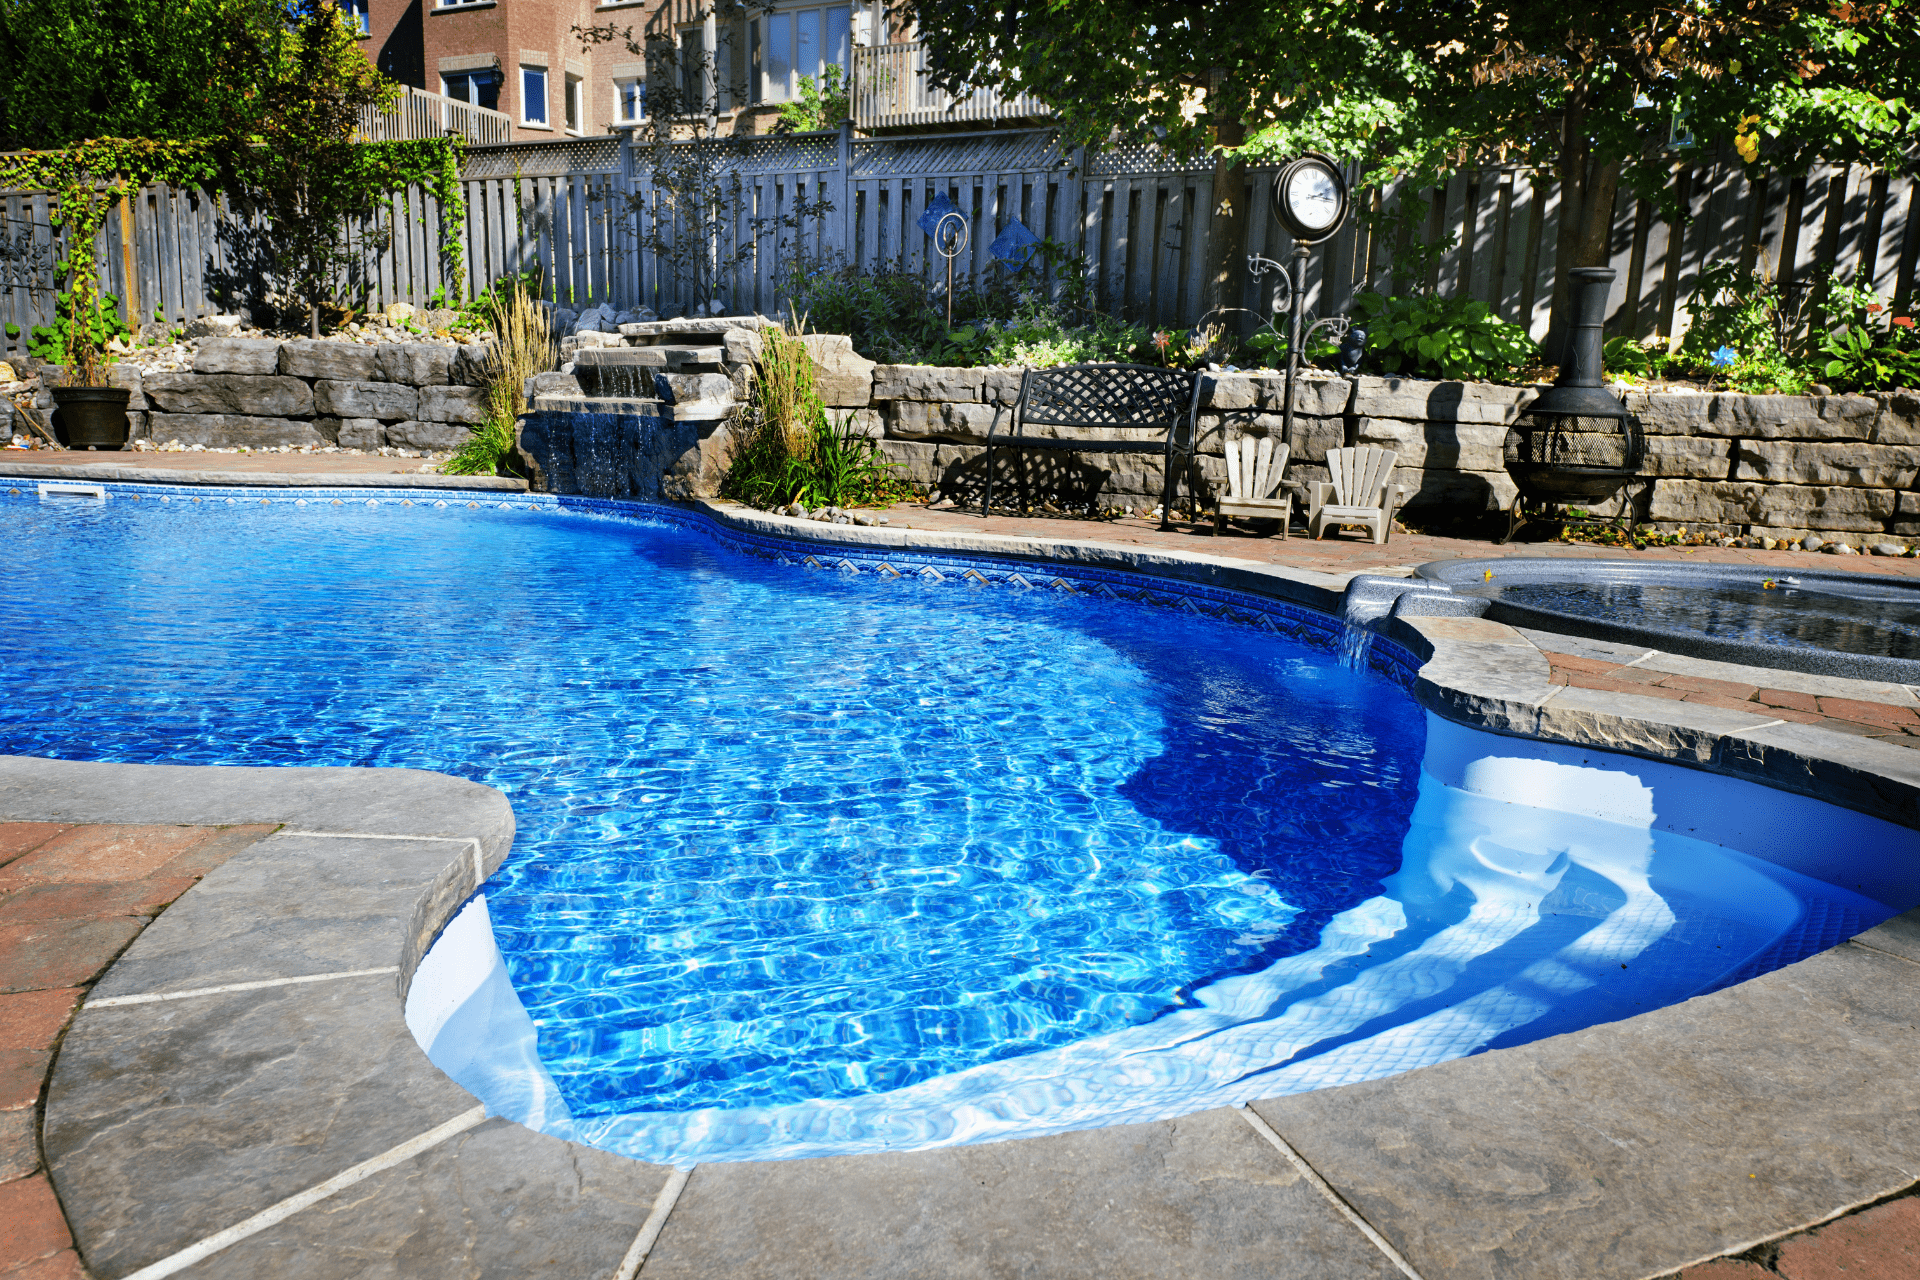 Swimming pool inside a backyard with the pool surround installed by Boise Landscaping Company